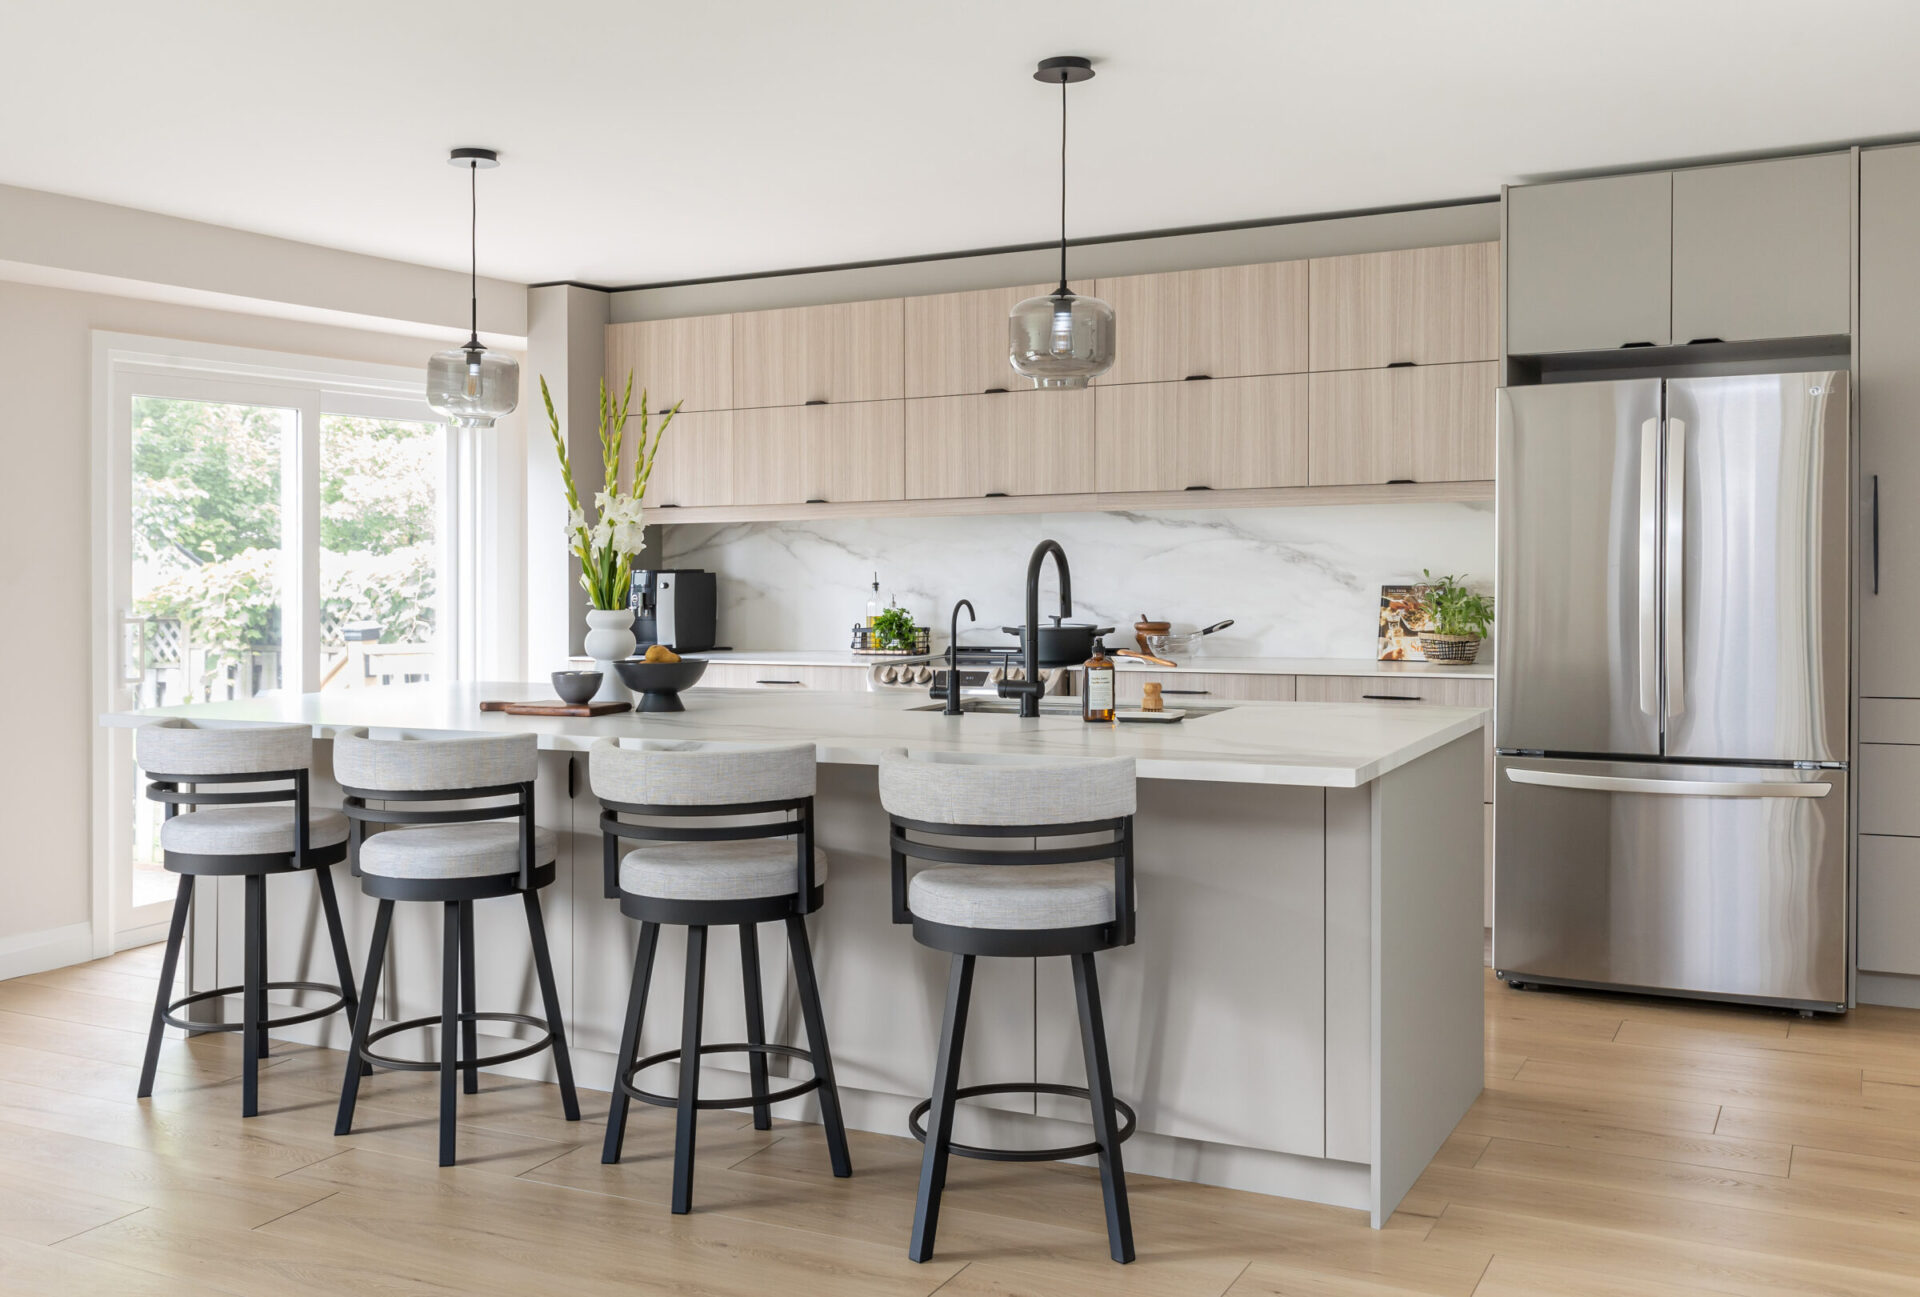 Modern kitchen interior with light wood cabinetry, white countertops, stainless steel appliances, a central island, and stylish pendant lighting.